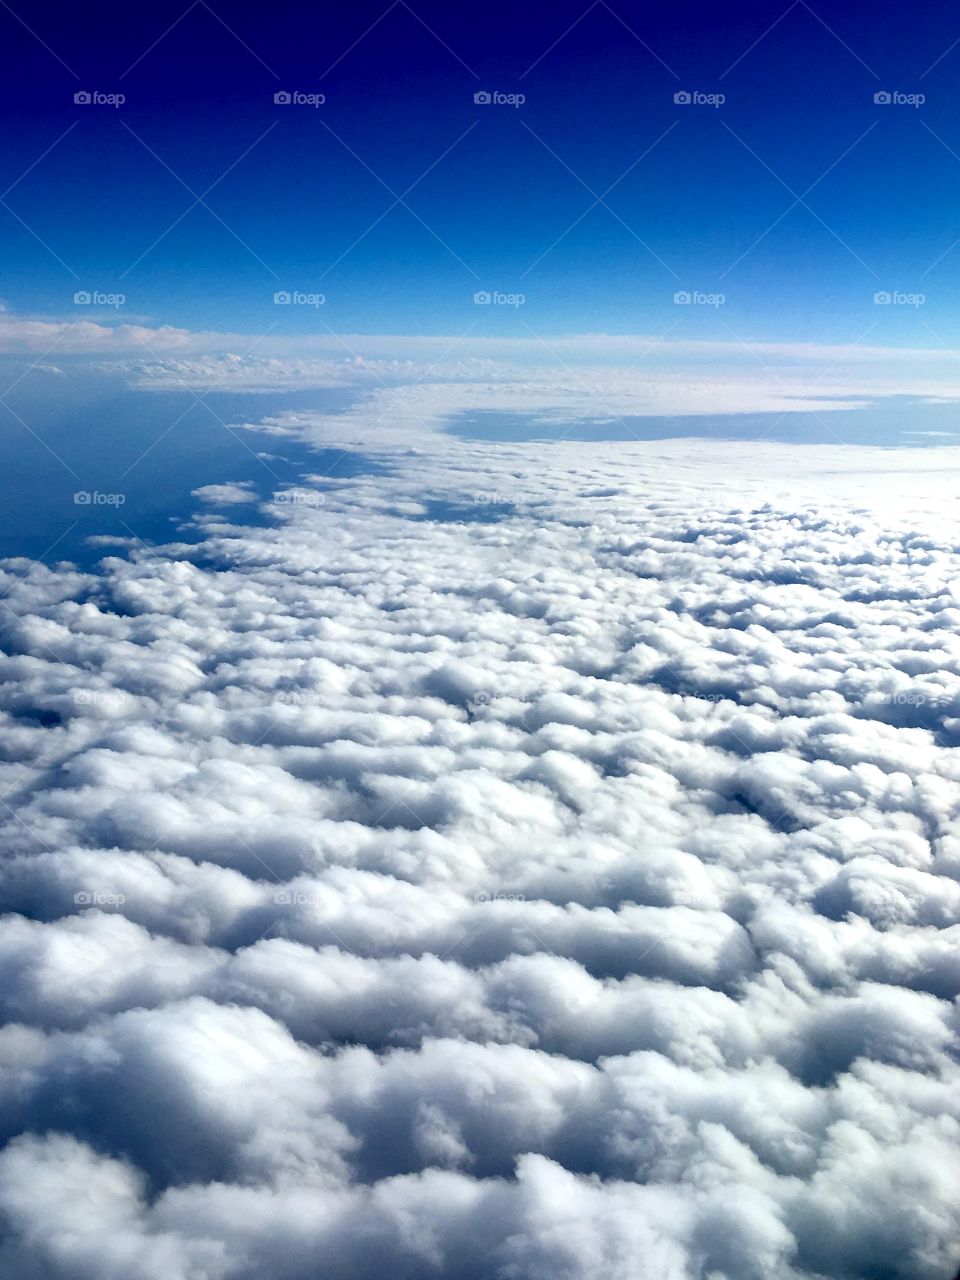 Looking down on the clouds from above.